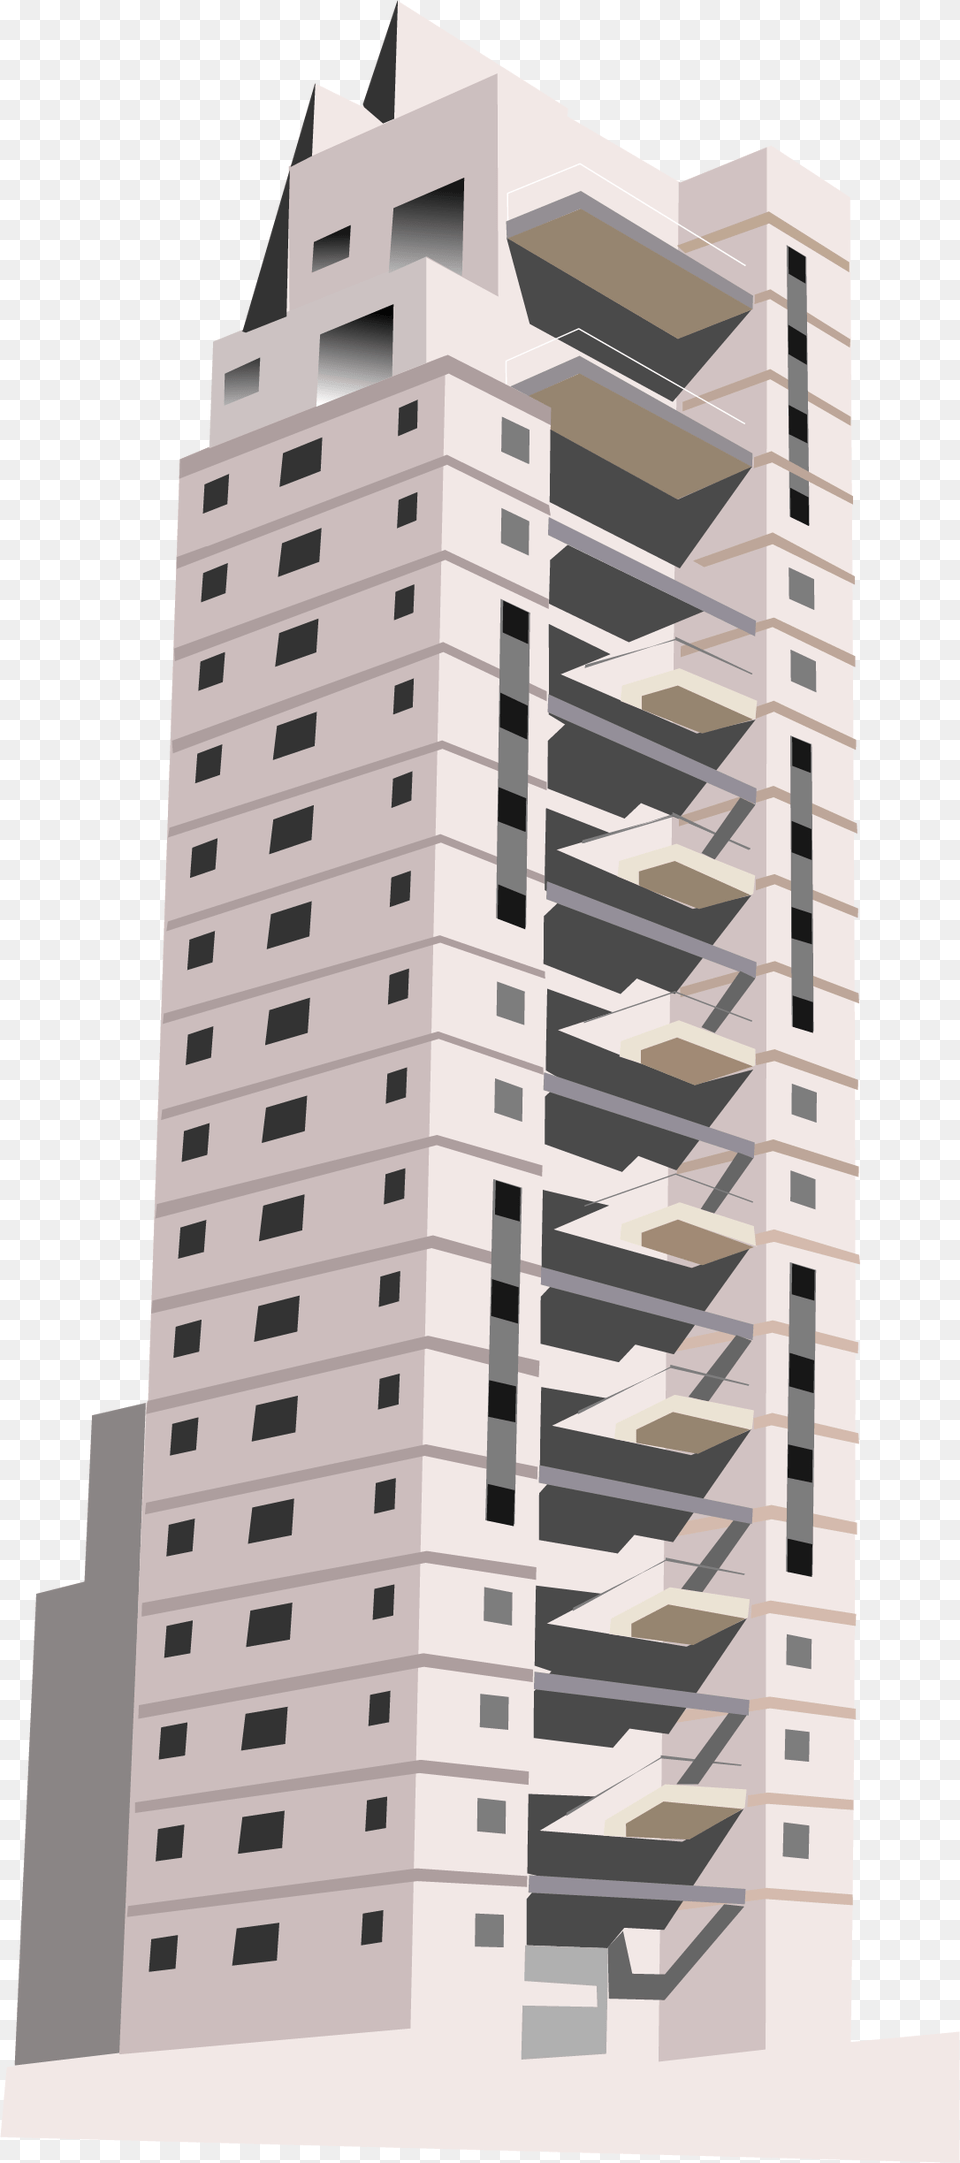 Tower Block, Apartment Building, Housing, High Rise, Condo Png